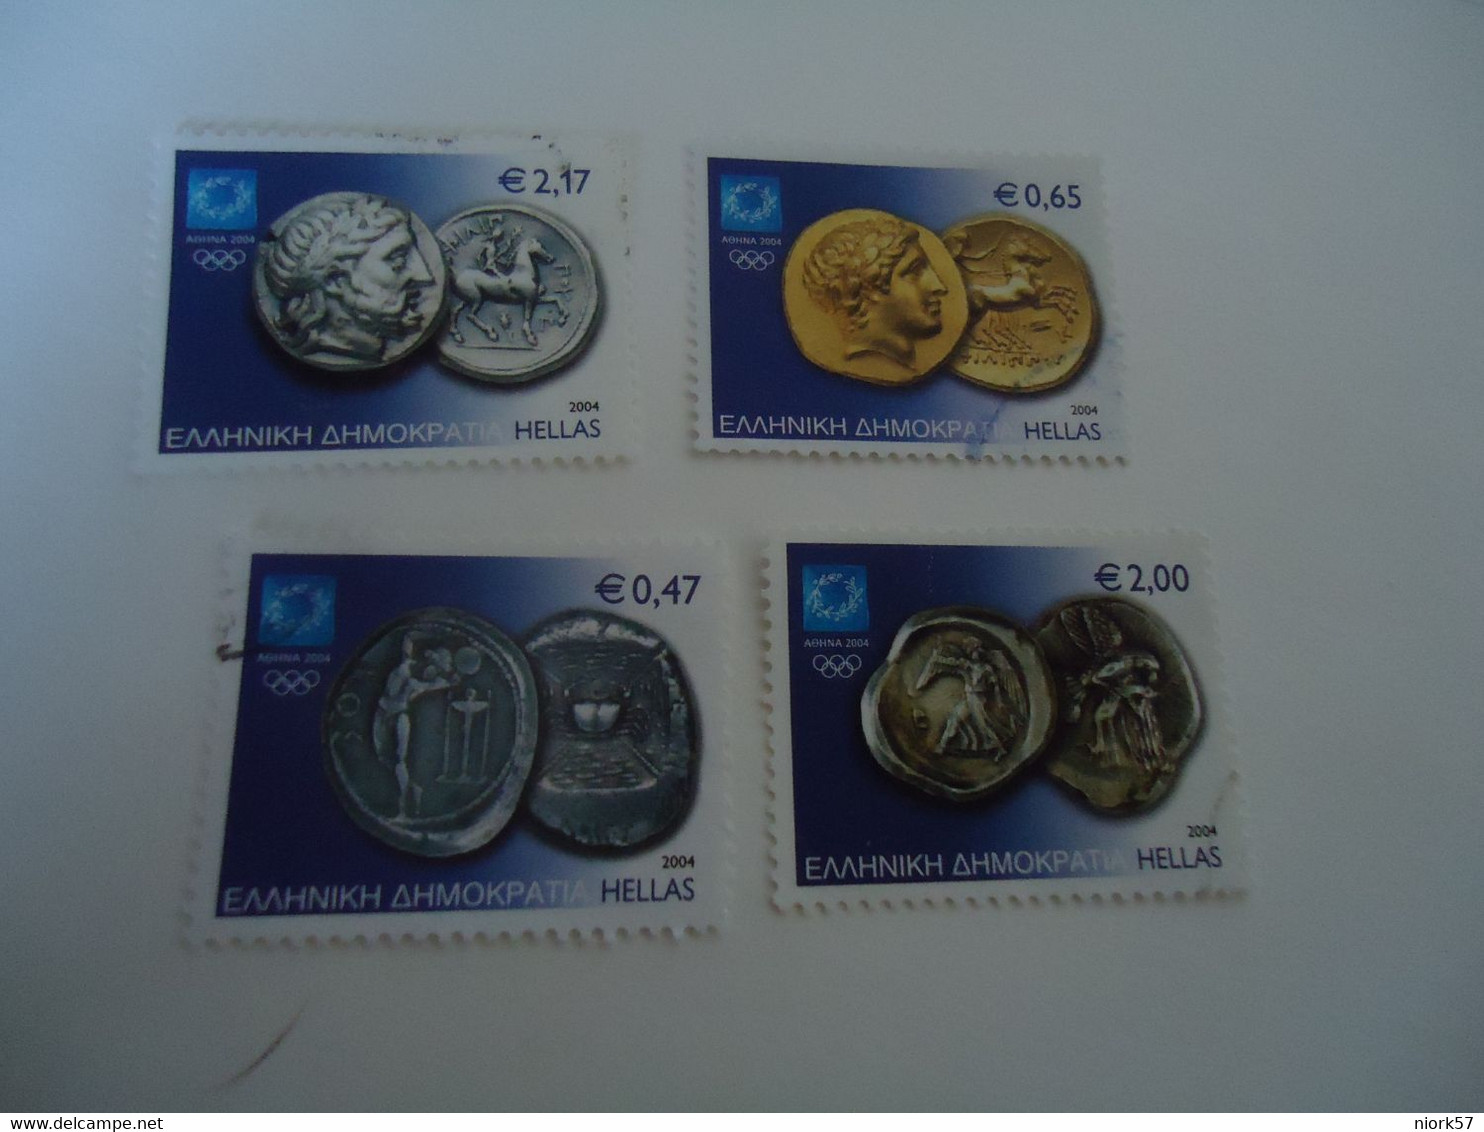 GREECE USED STAMPS  SET  2004 OLYMPIC GAMES  ATHENS   COINS ATHLETES - Zomer 2004: Athene - Paralympics